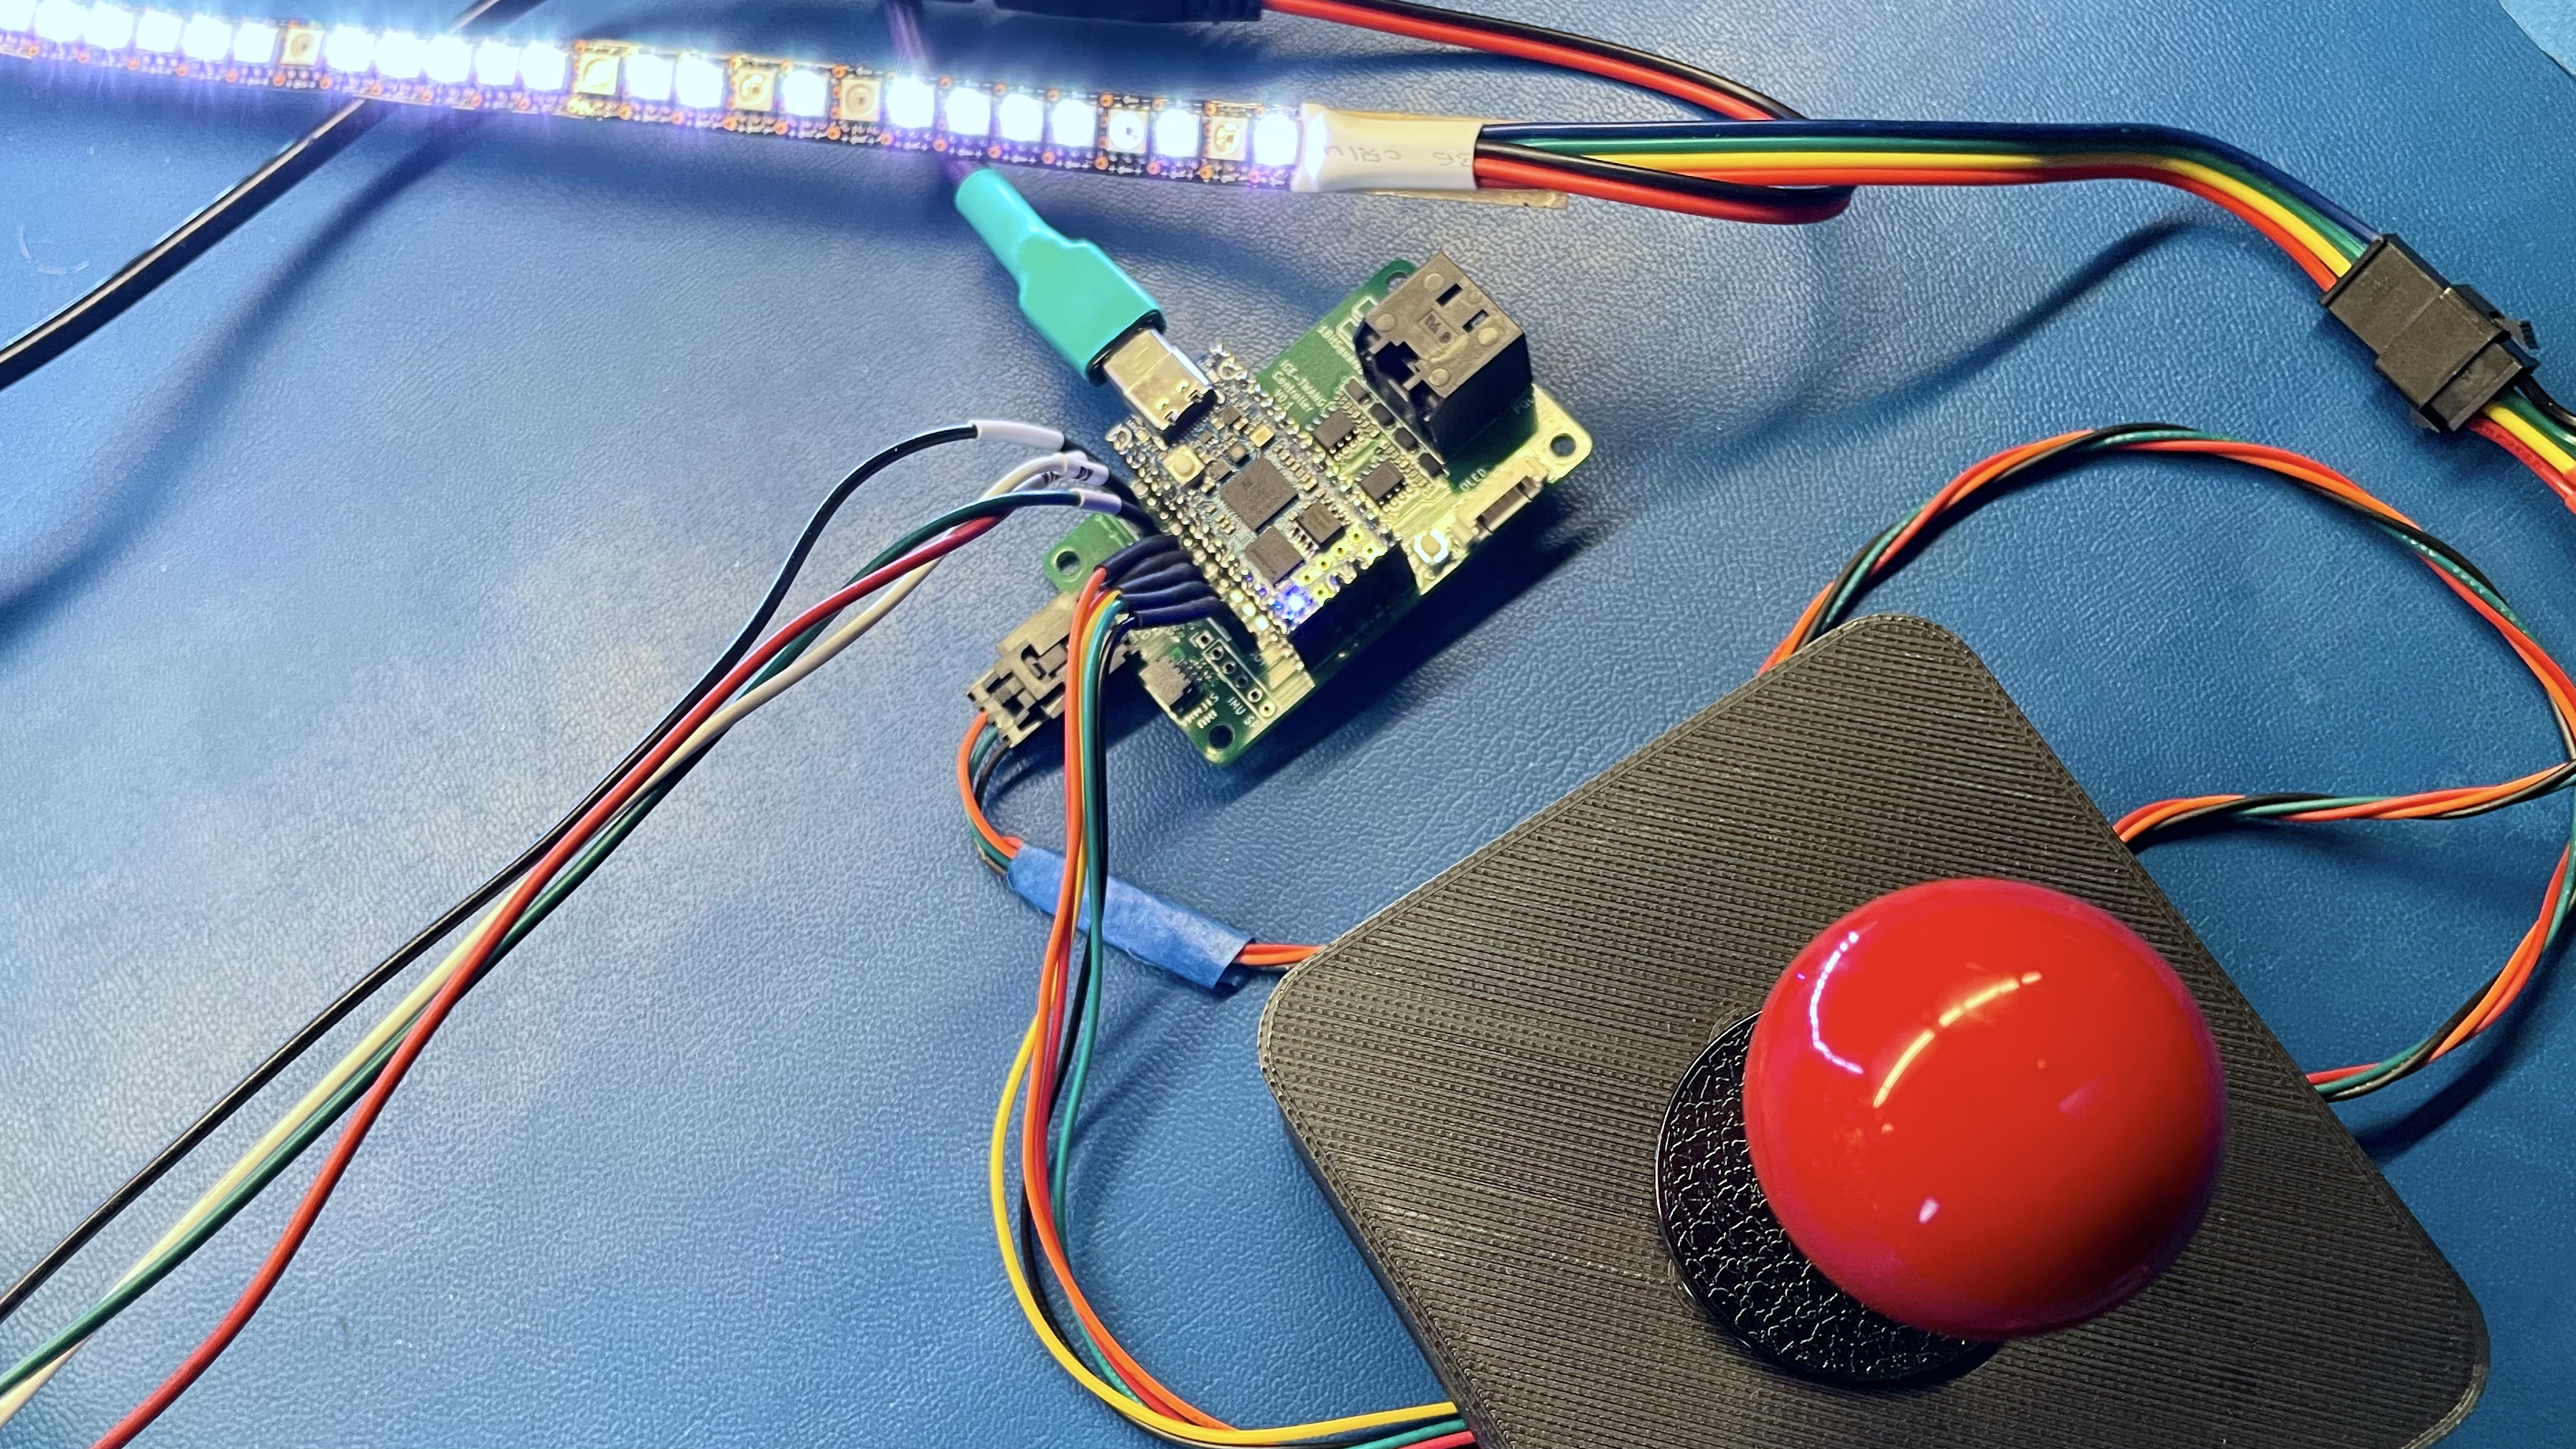 The minimum vaiable setup, using the iCEtwang controller board, an APA102 LED strip and an arcade joystick